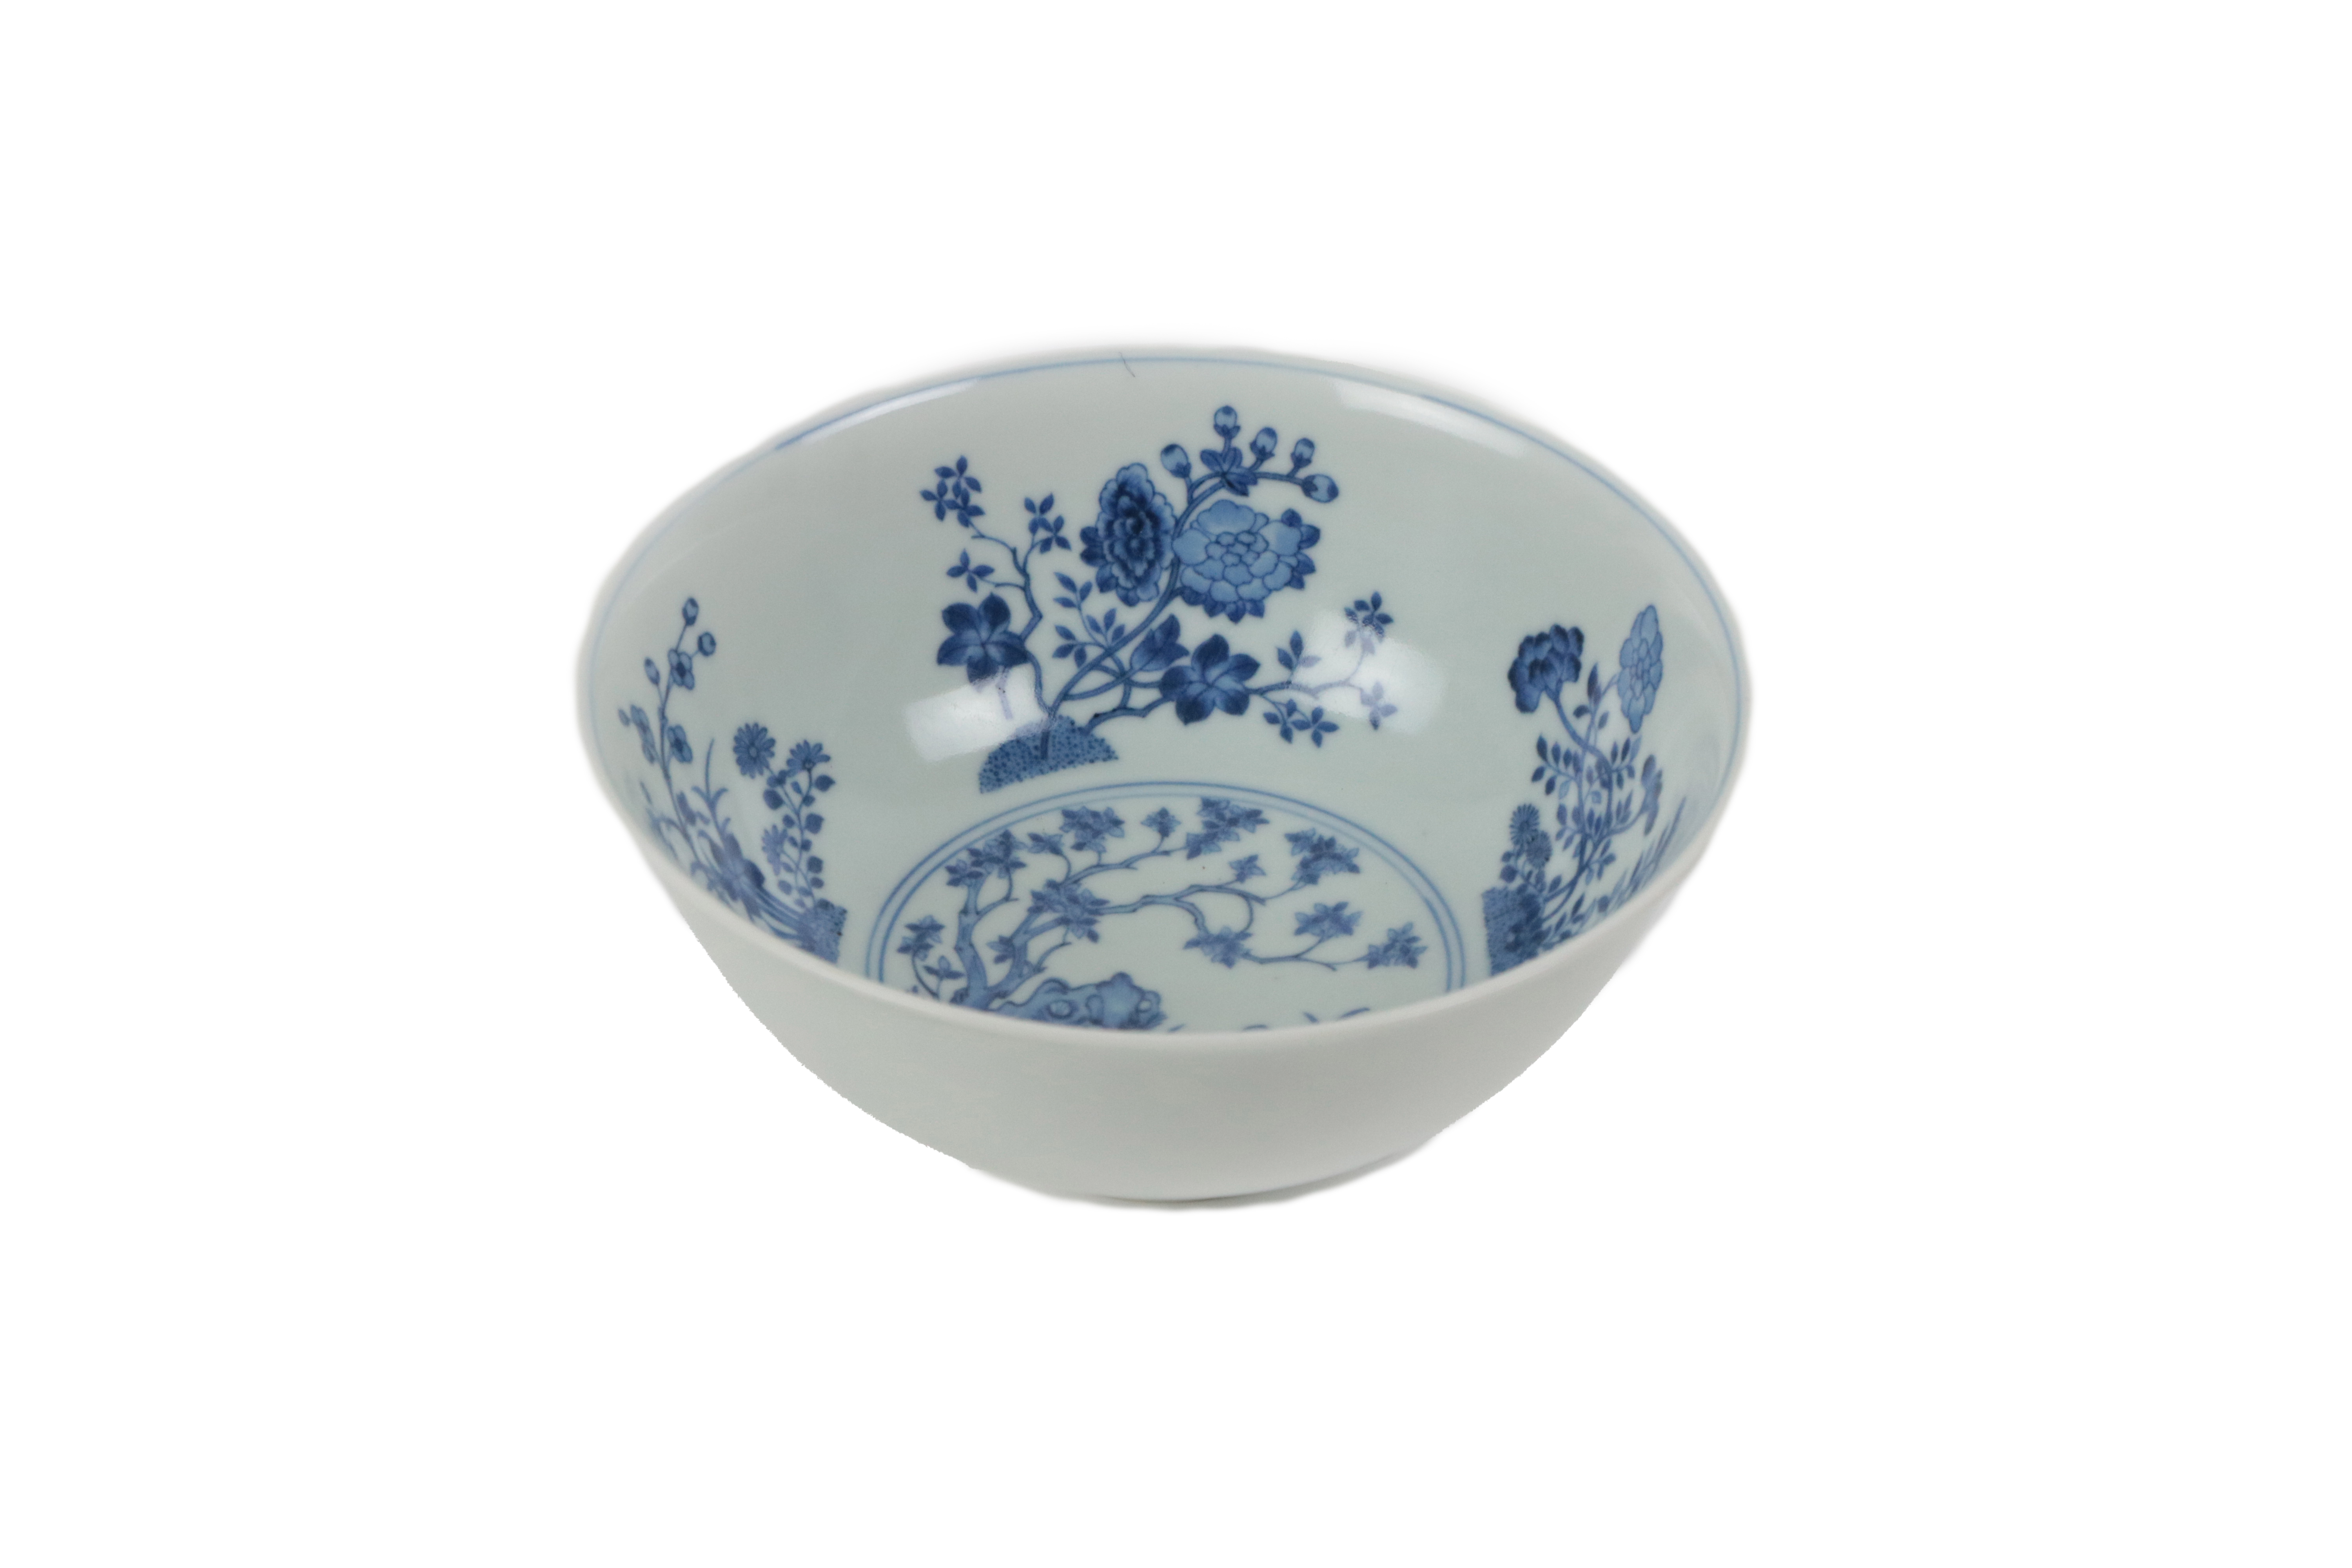 An attractive early Chinese blue and white 'Flower' Bowl, the interior decorated with central